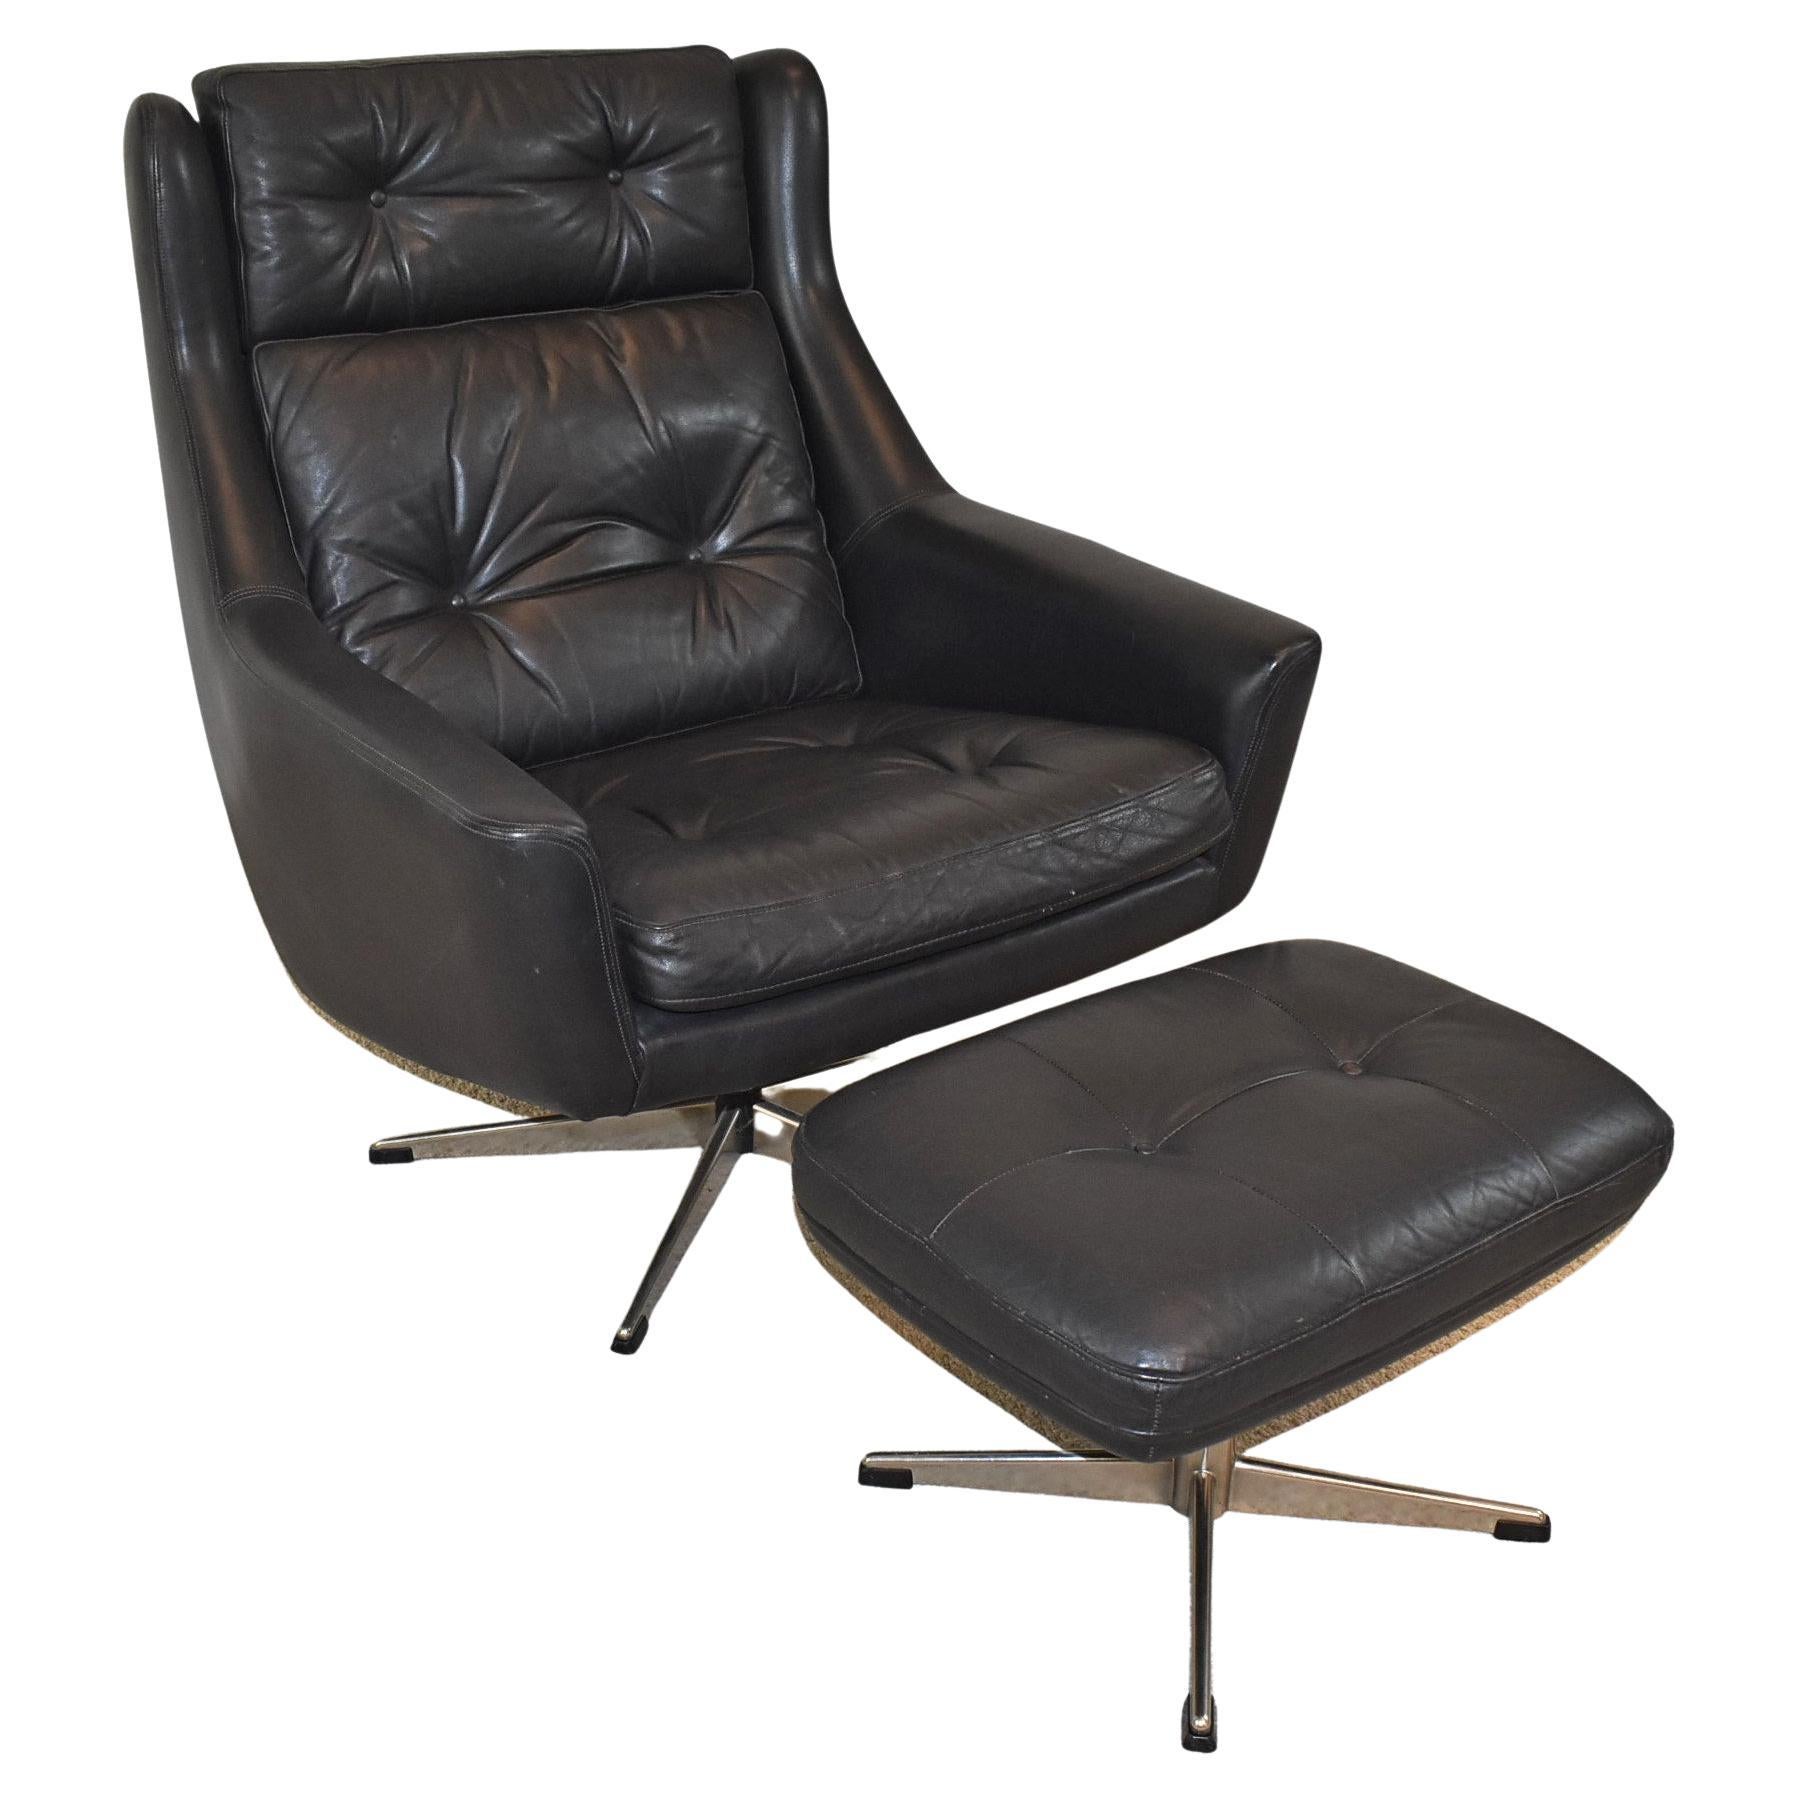 Erhardsen & Andersen, "Siesta" Chair with Ottoman, Black Leather, Lounge Chair For Sale